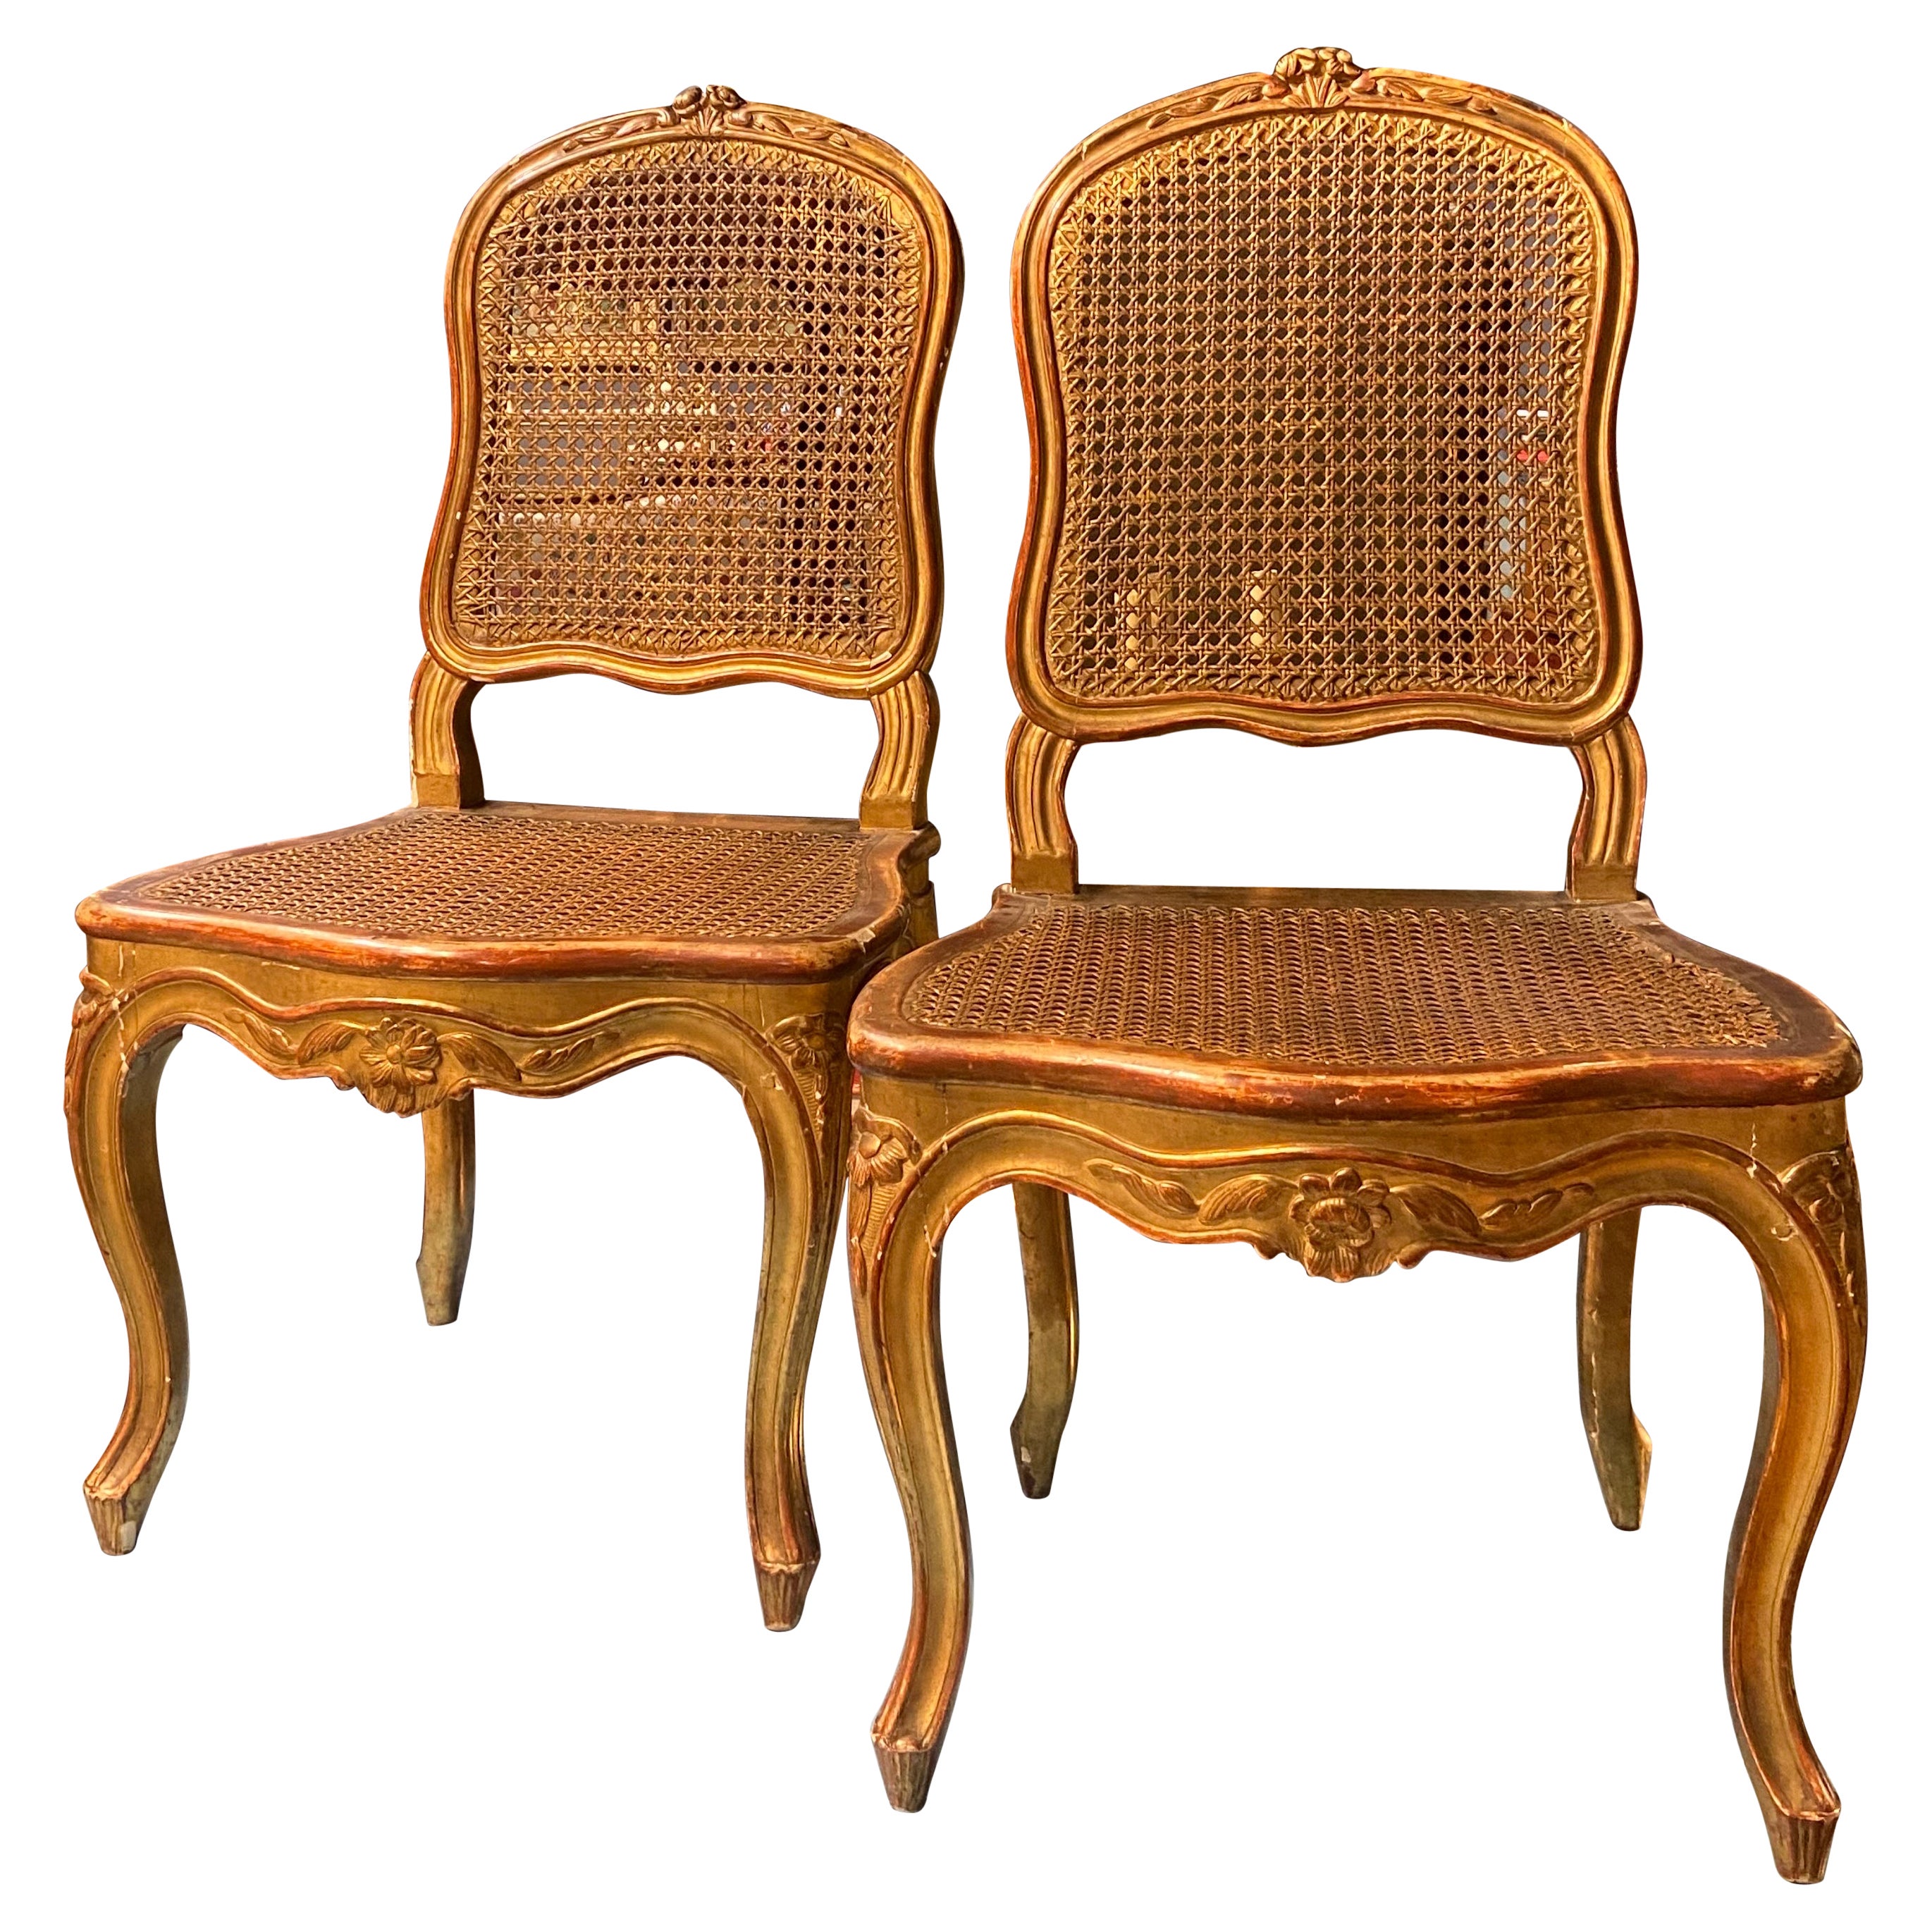 19th Century French Gilt Wood Hand Carved Cane Chairs in Louis XV Style For Sale